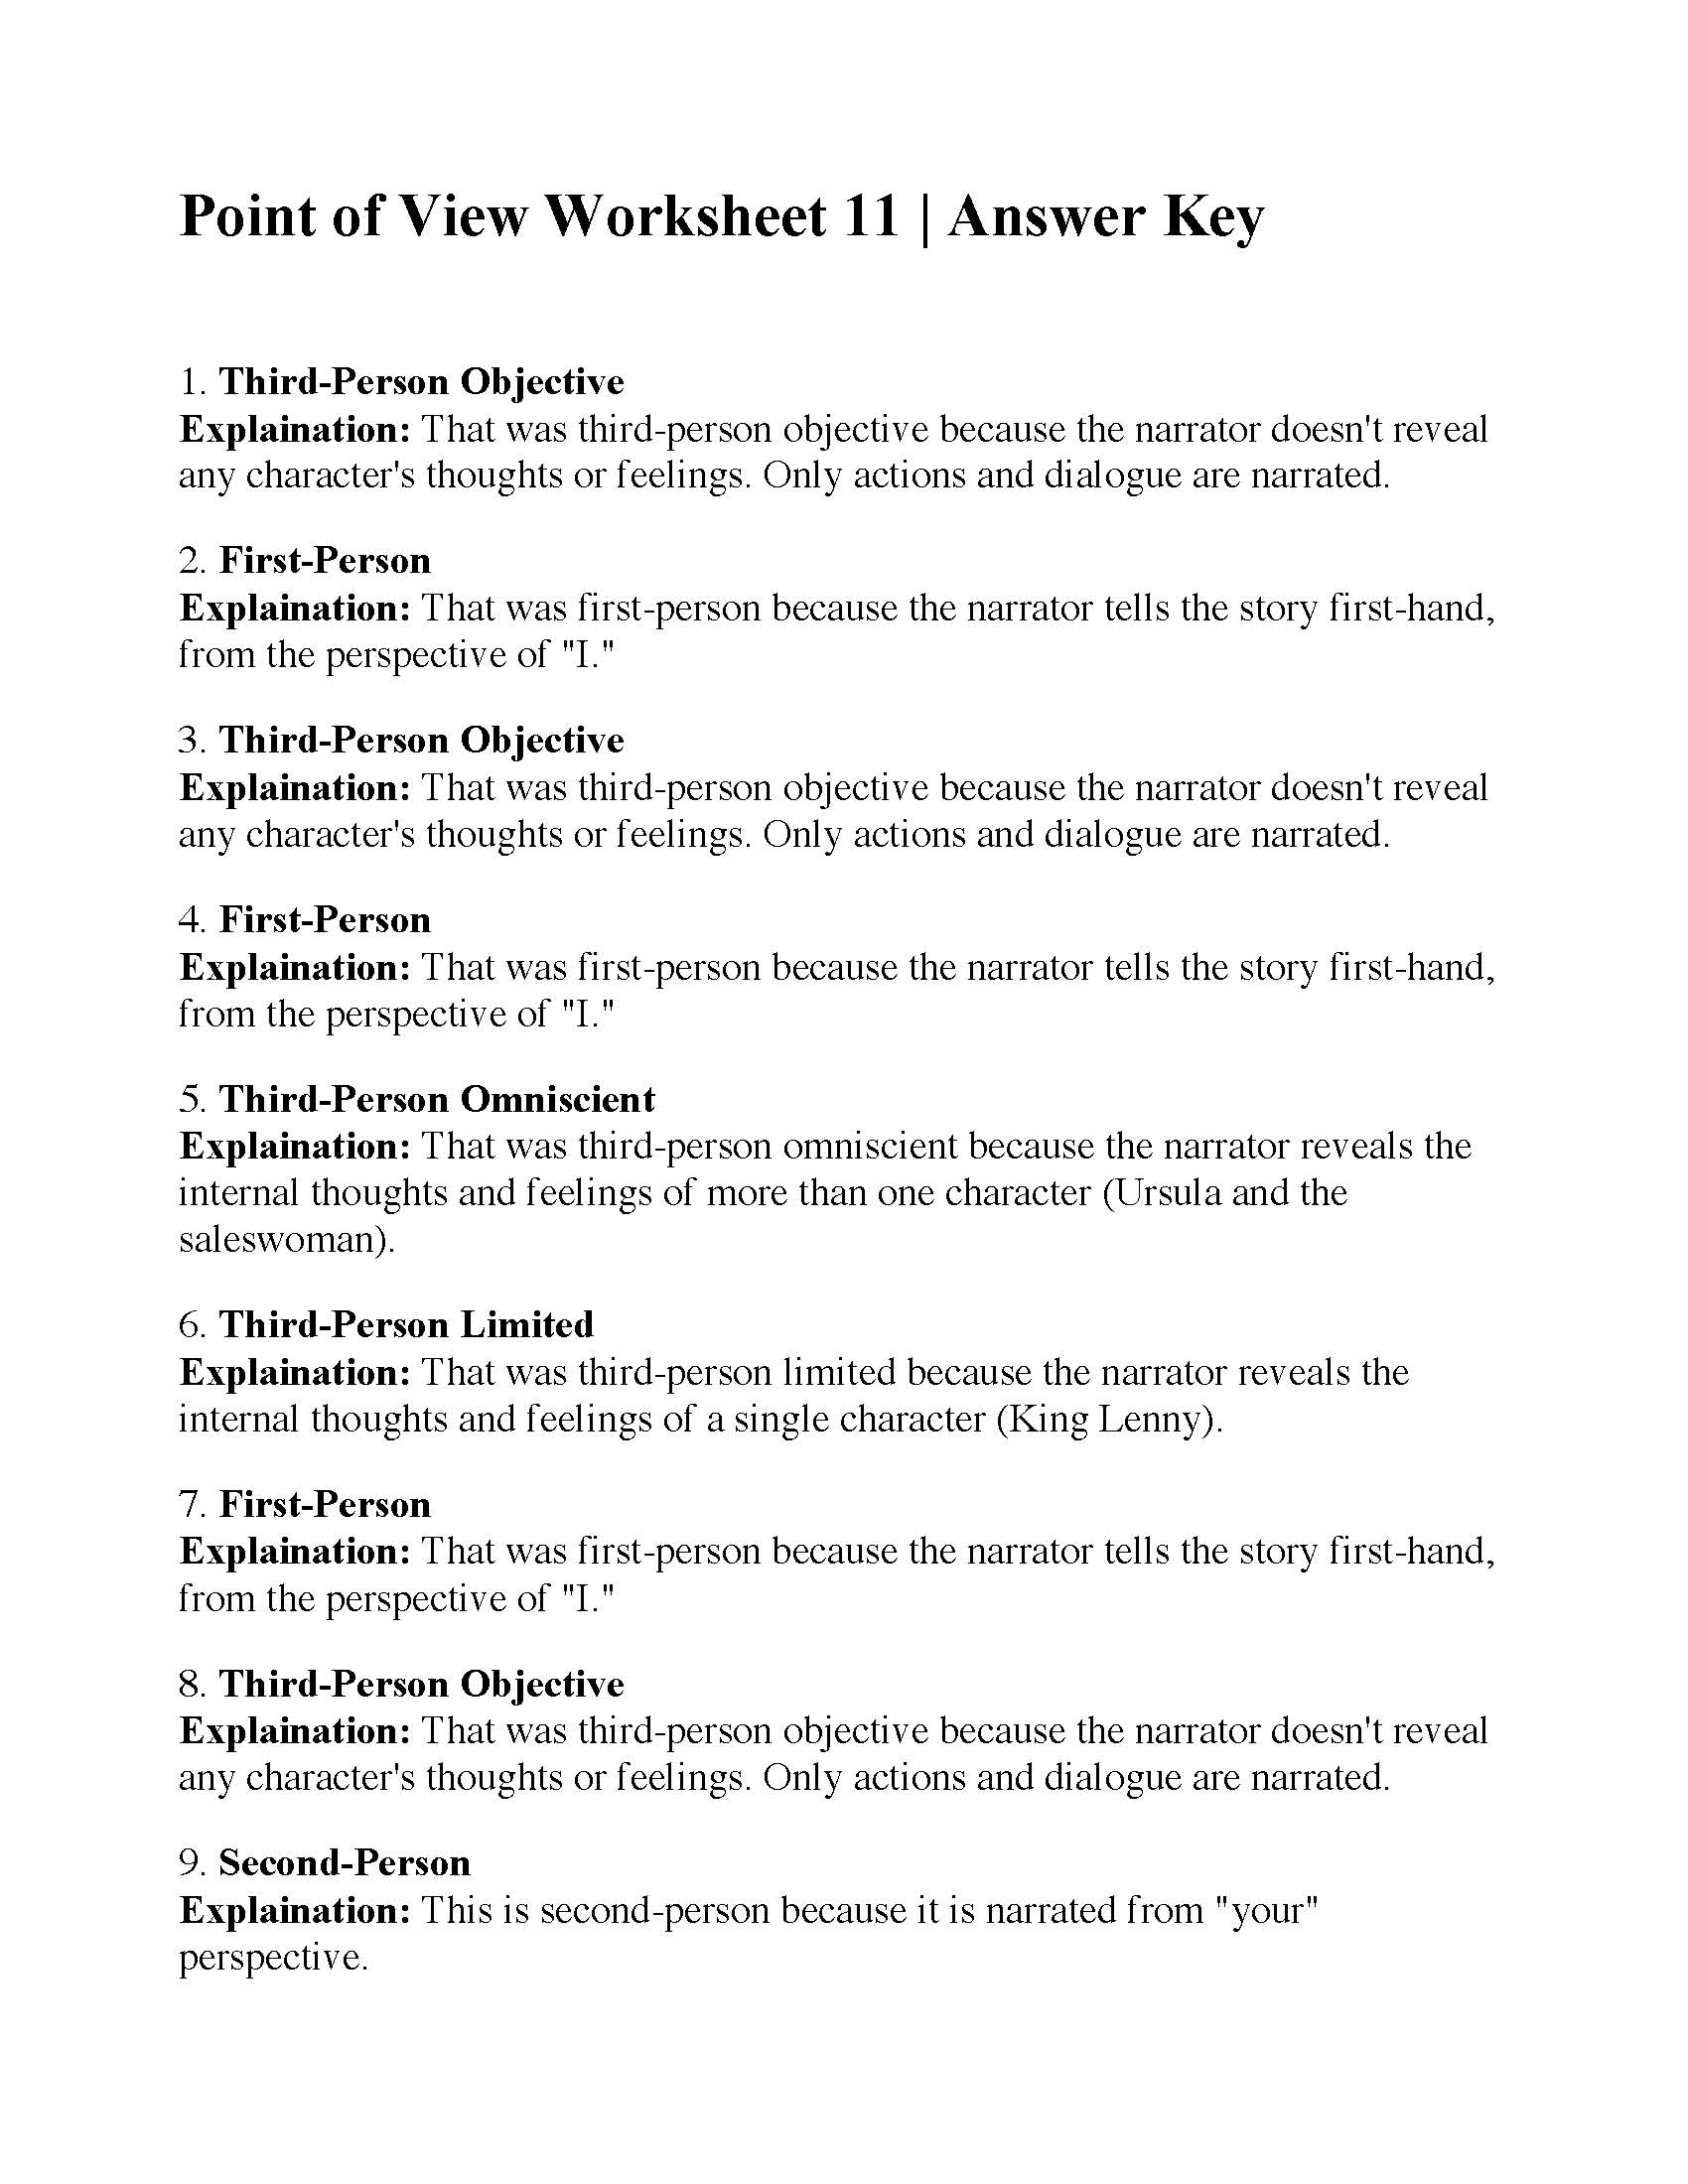 Point of View Worksheet 11  Answers Regarding Point Of View Worksheet 11